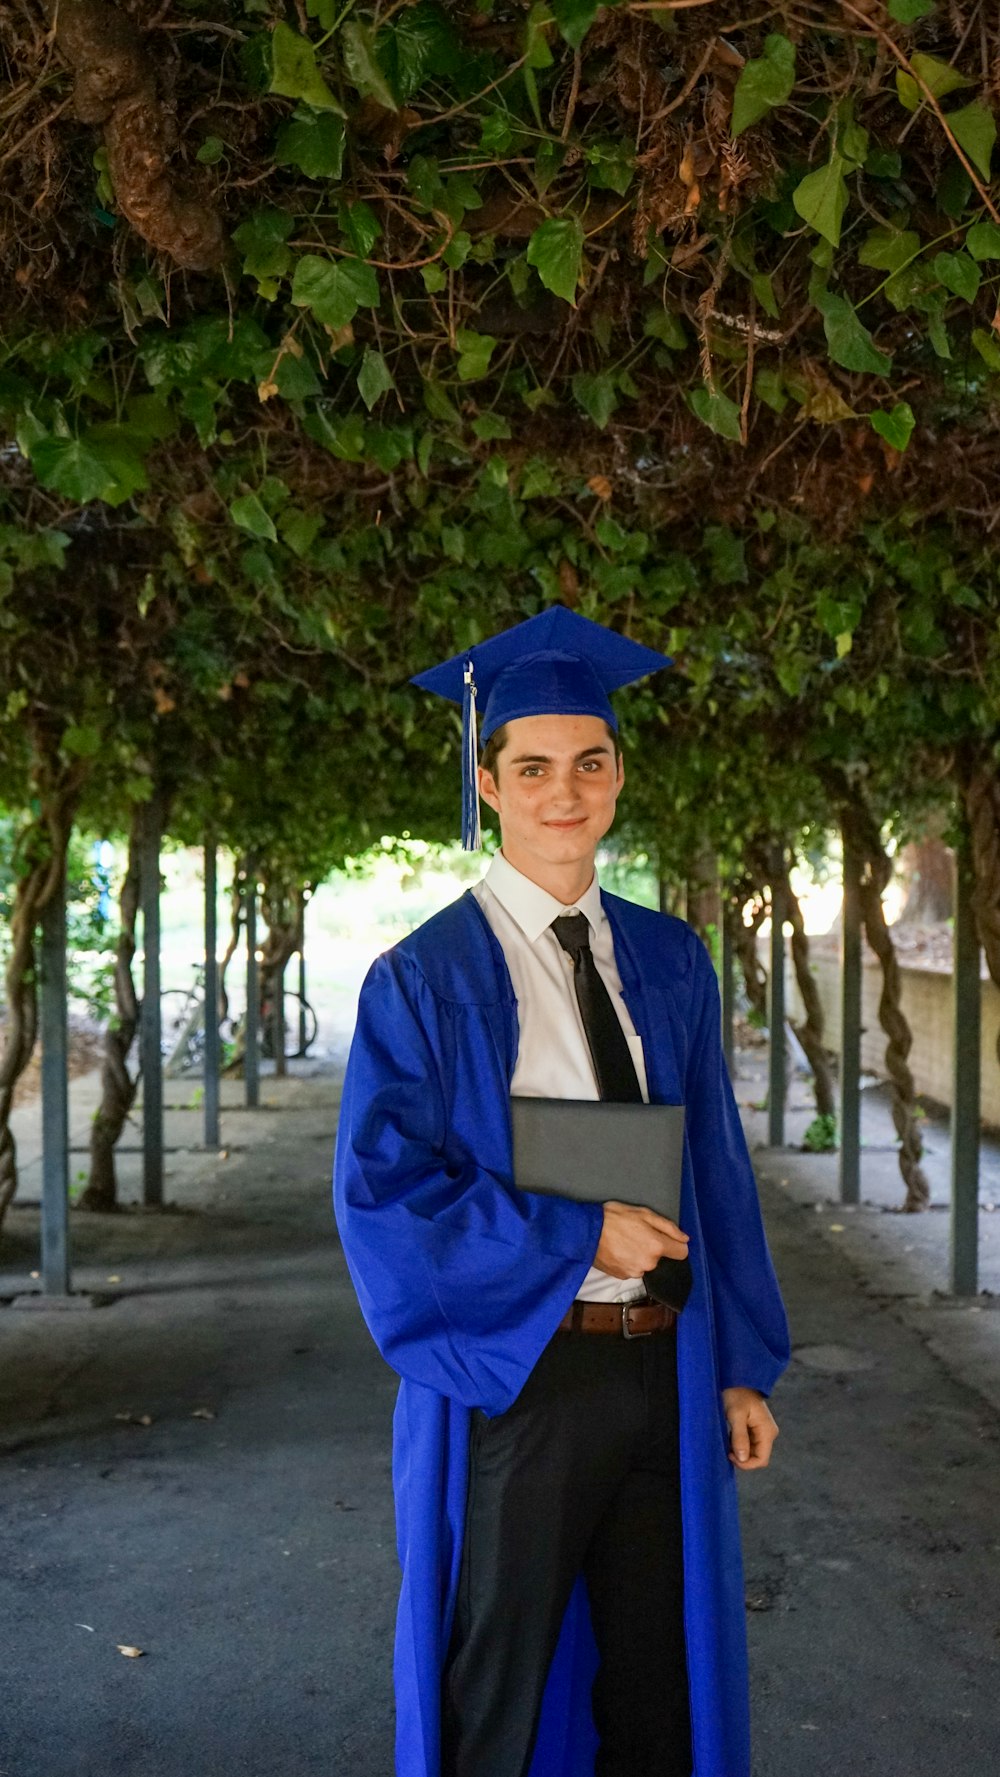 man in blue academic dress and academic hat standing near green tree during daytime